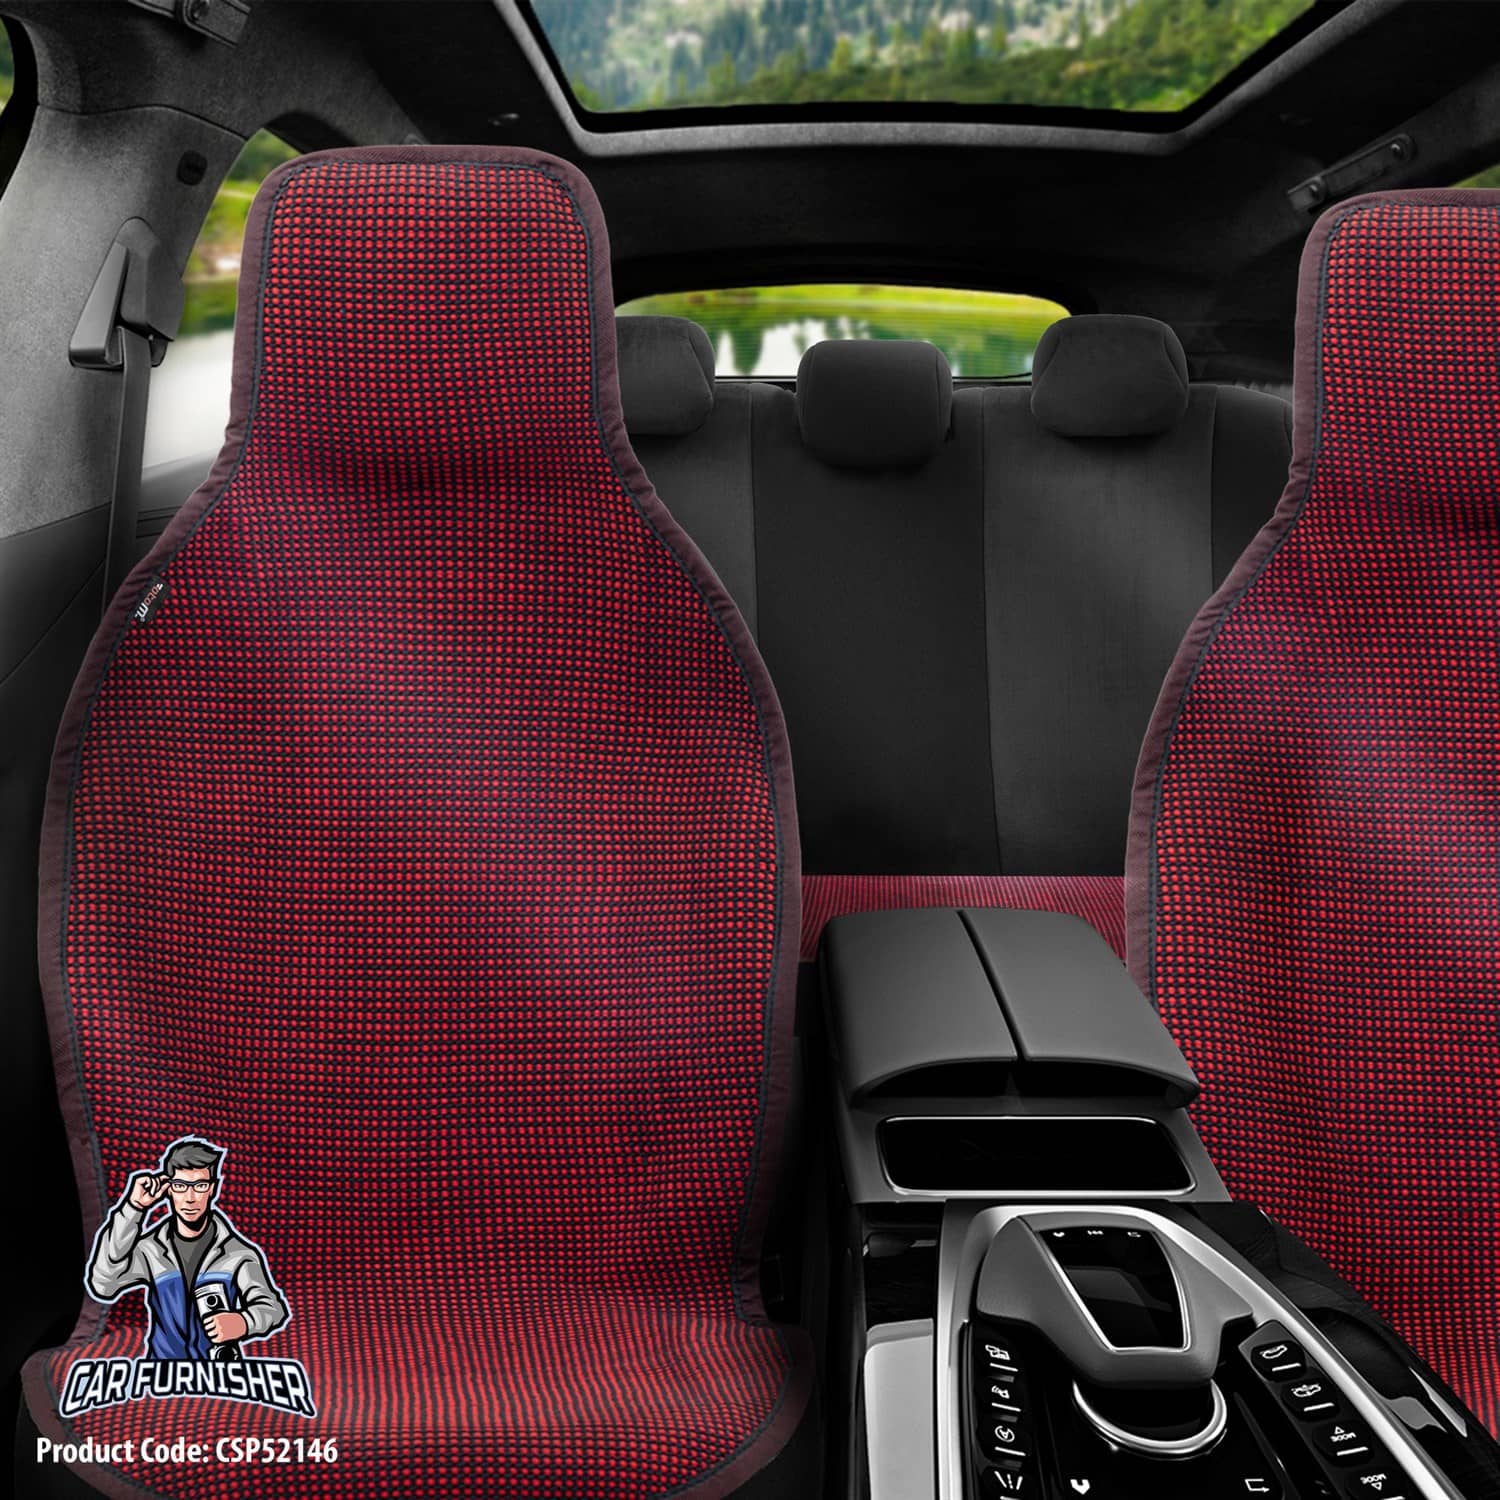 Hand Woven Car Seat Cushion & Seat Protector Natural Series Burgundy Full Set (2x Front+1x Back) Cotton & Fabric